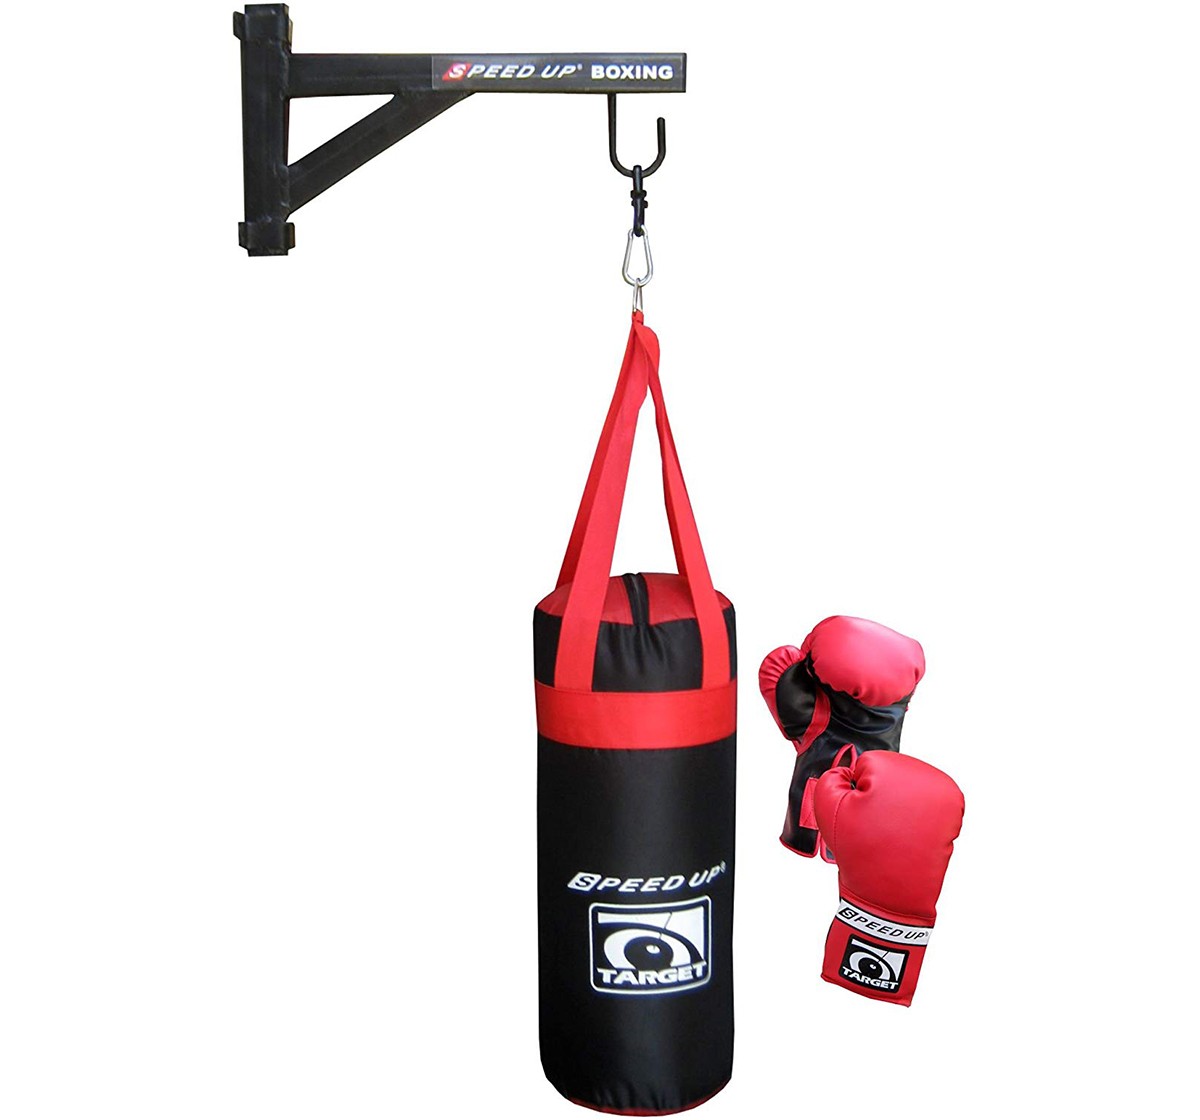  Speed Up Junior Boxing Set for Kids age 5Y+ 